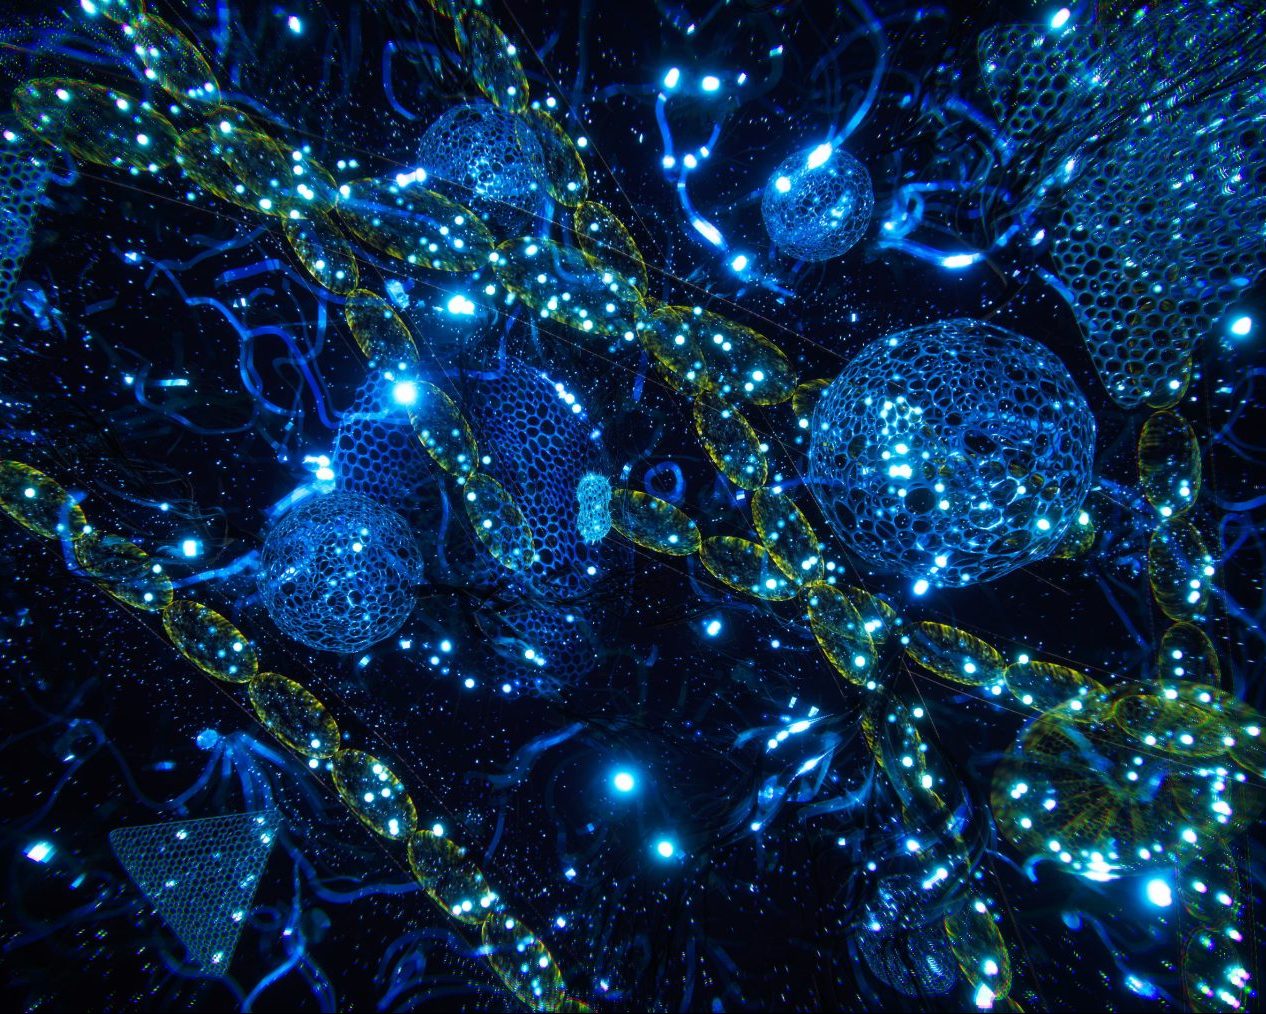 An image from the exhibition, Water Portals by Henry Driver. The image depicts abstract, macro detailed graphics of microscopic life. The main colour is blue.